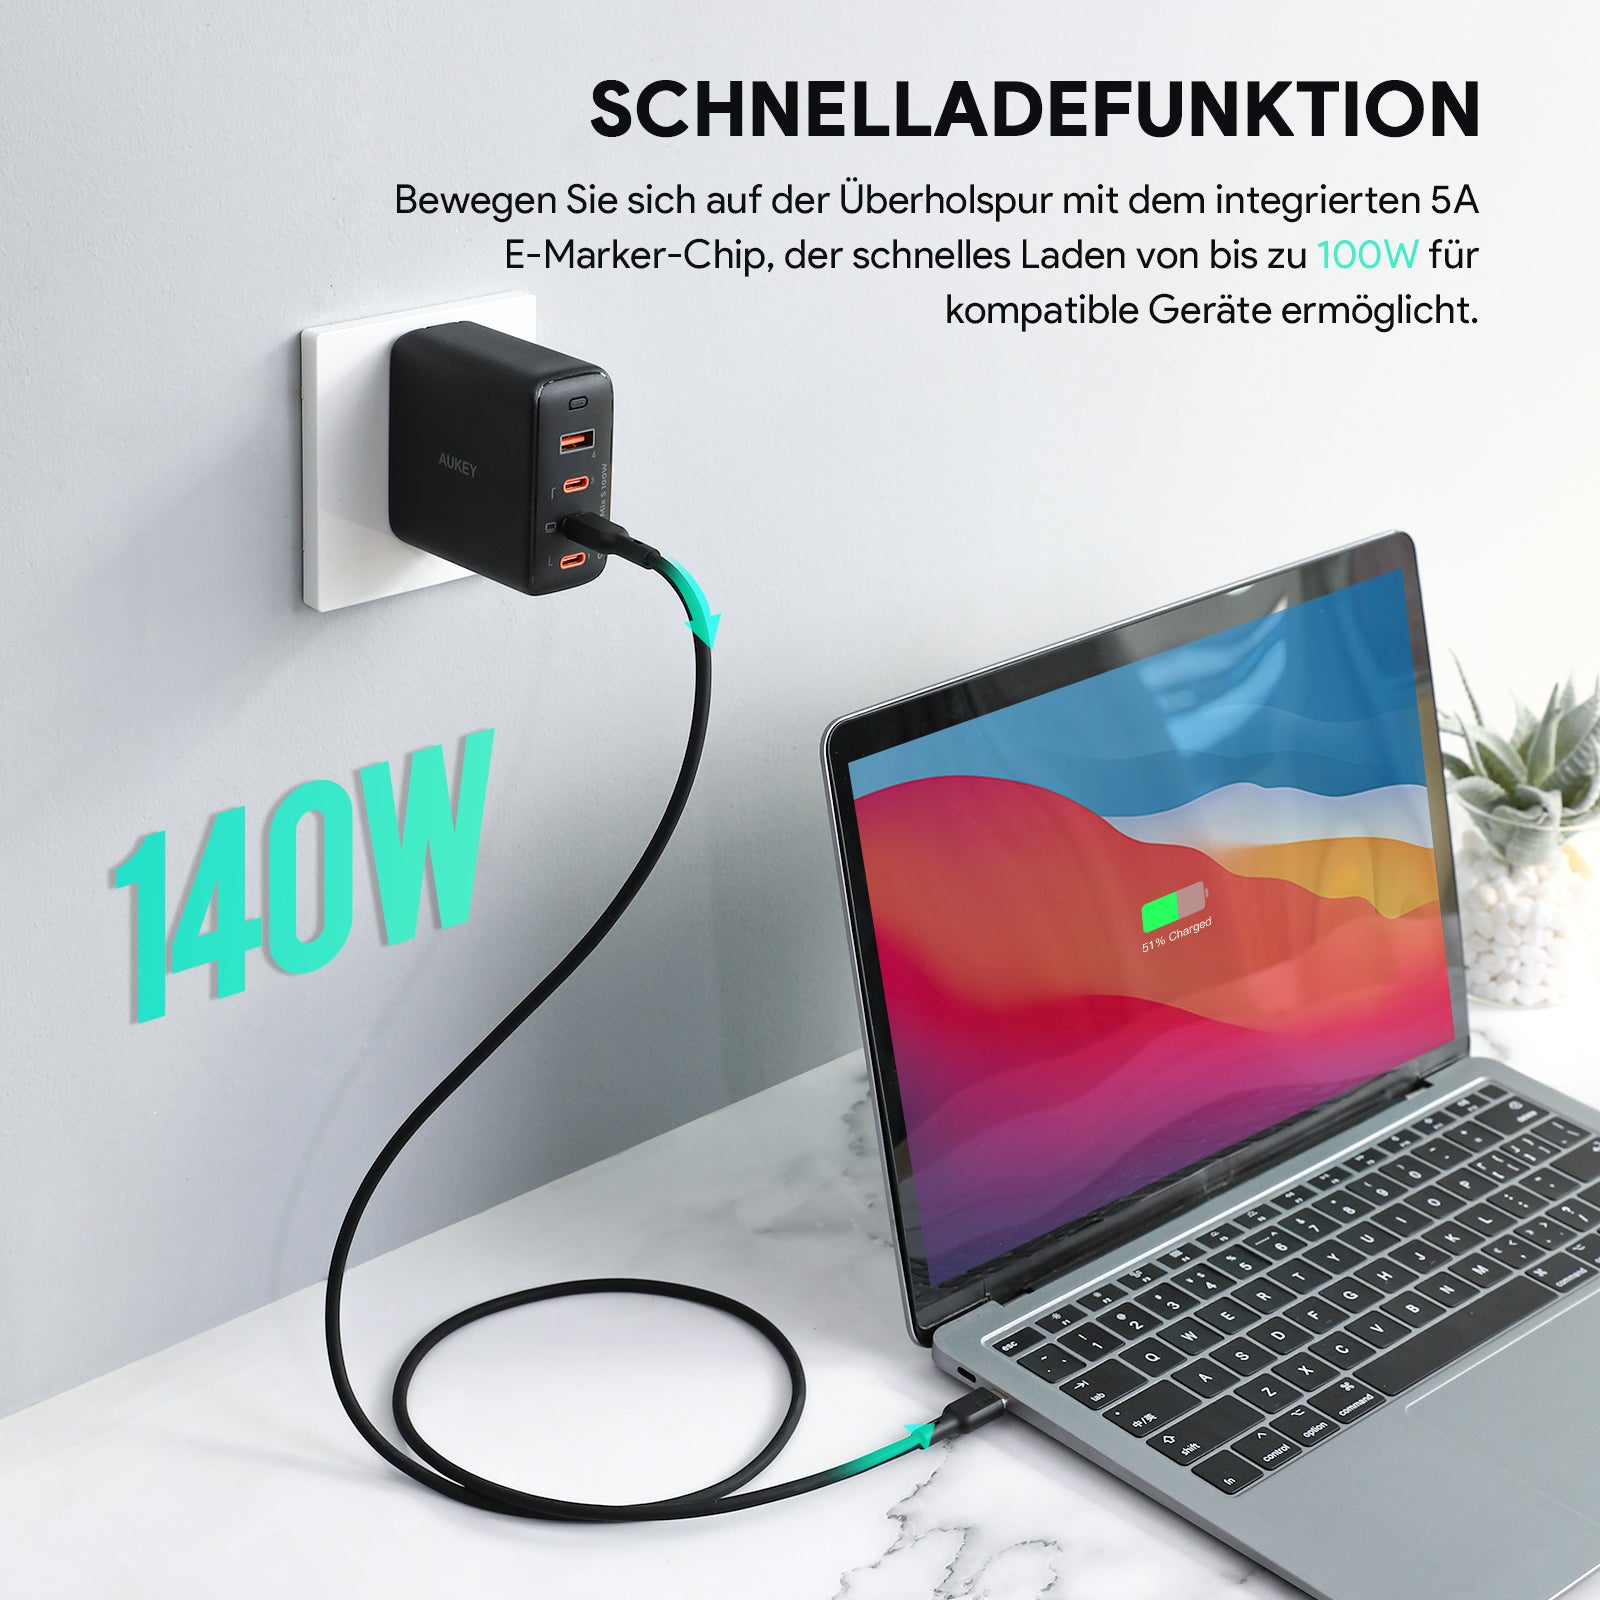 AUKEY CB-SCC Series Circlet Blink 100W 1m Silicone USB-C to USB-C Cable